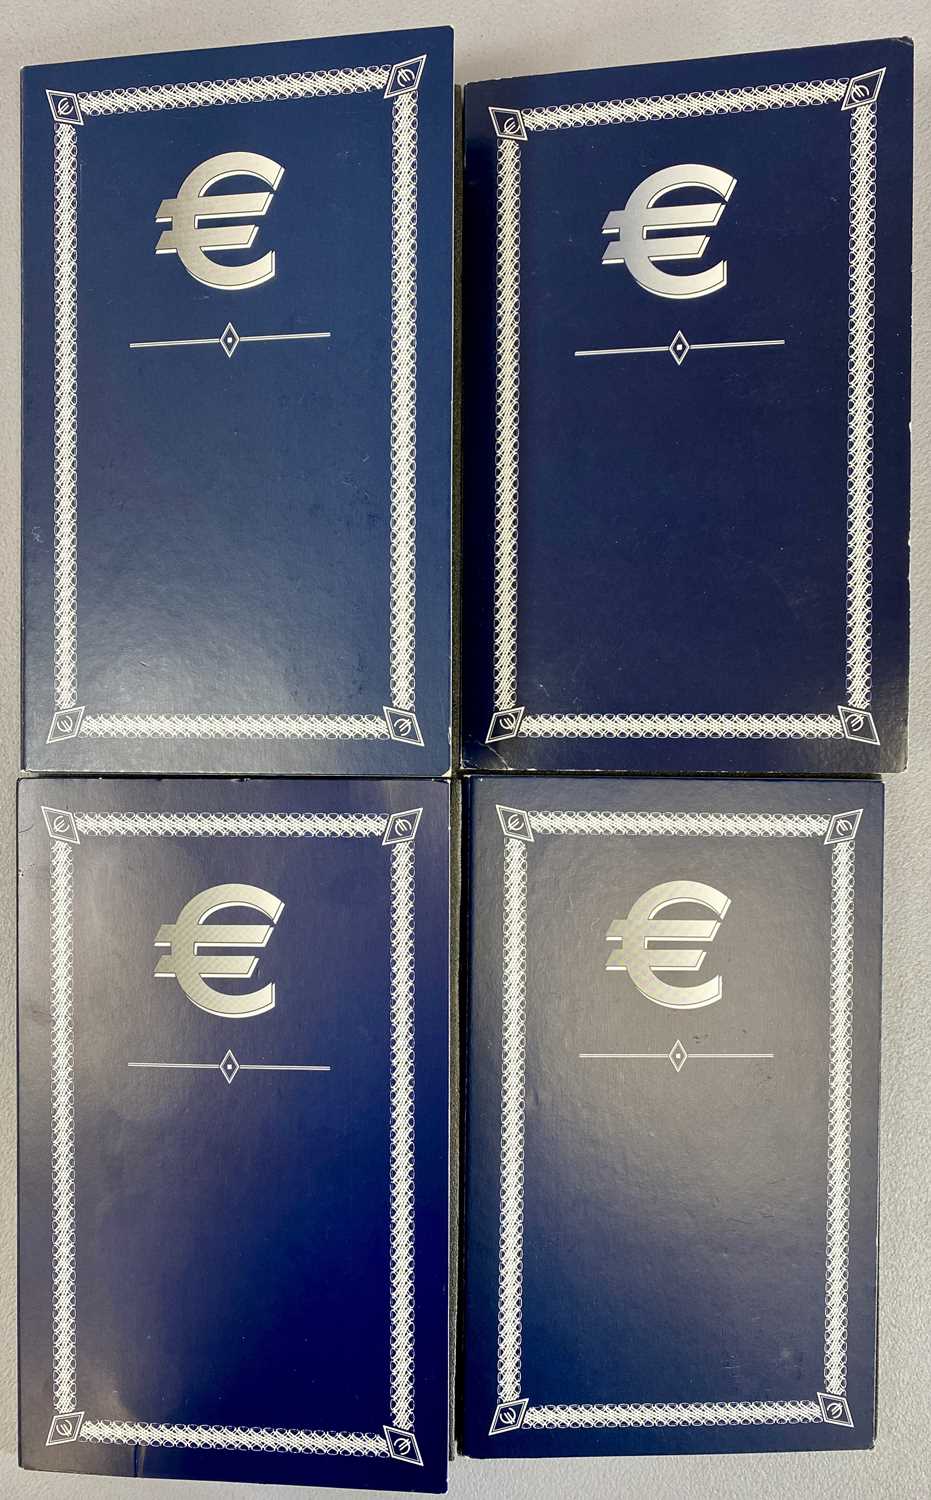 FOUR PROBE-EURO & EURO COLLECTION COIN SETS, 2 x 2002, 1 x 2005, 1 x 2008, all with protective - Image 2 of 2